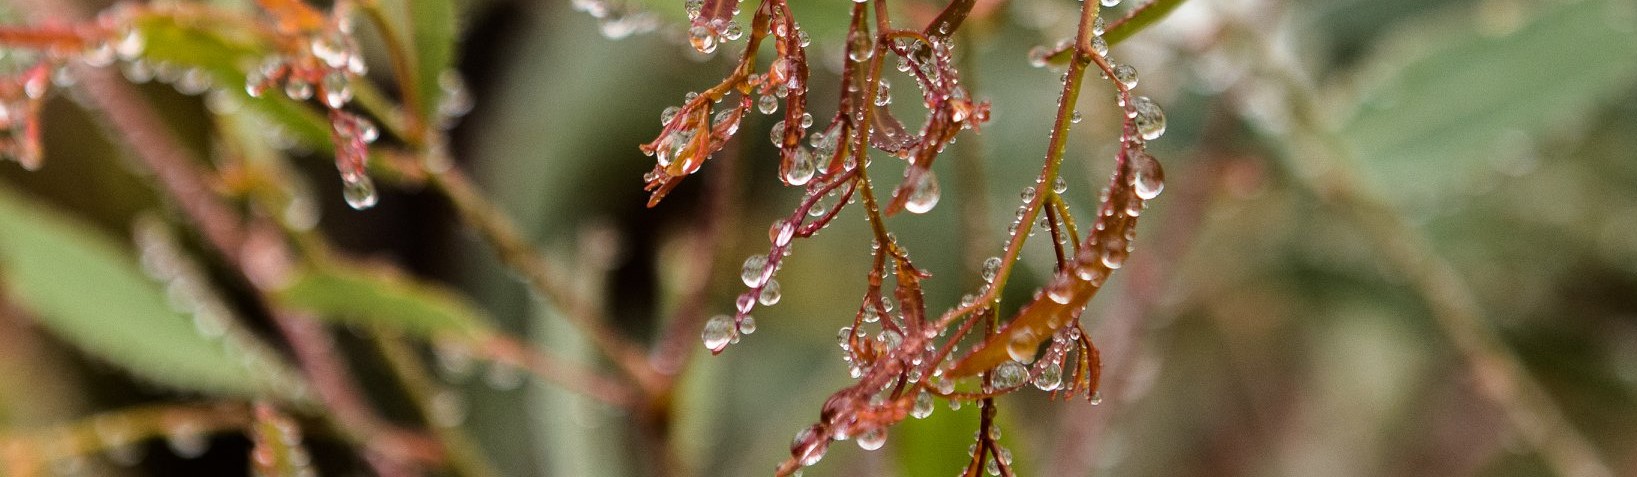 Macro photo of plant with water drops after the rain in Warrumbungle National Park